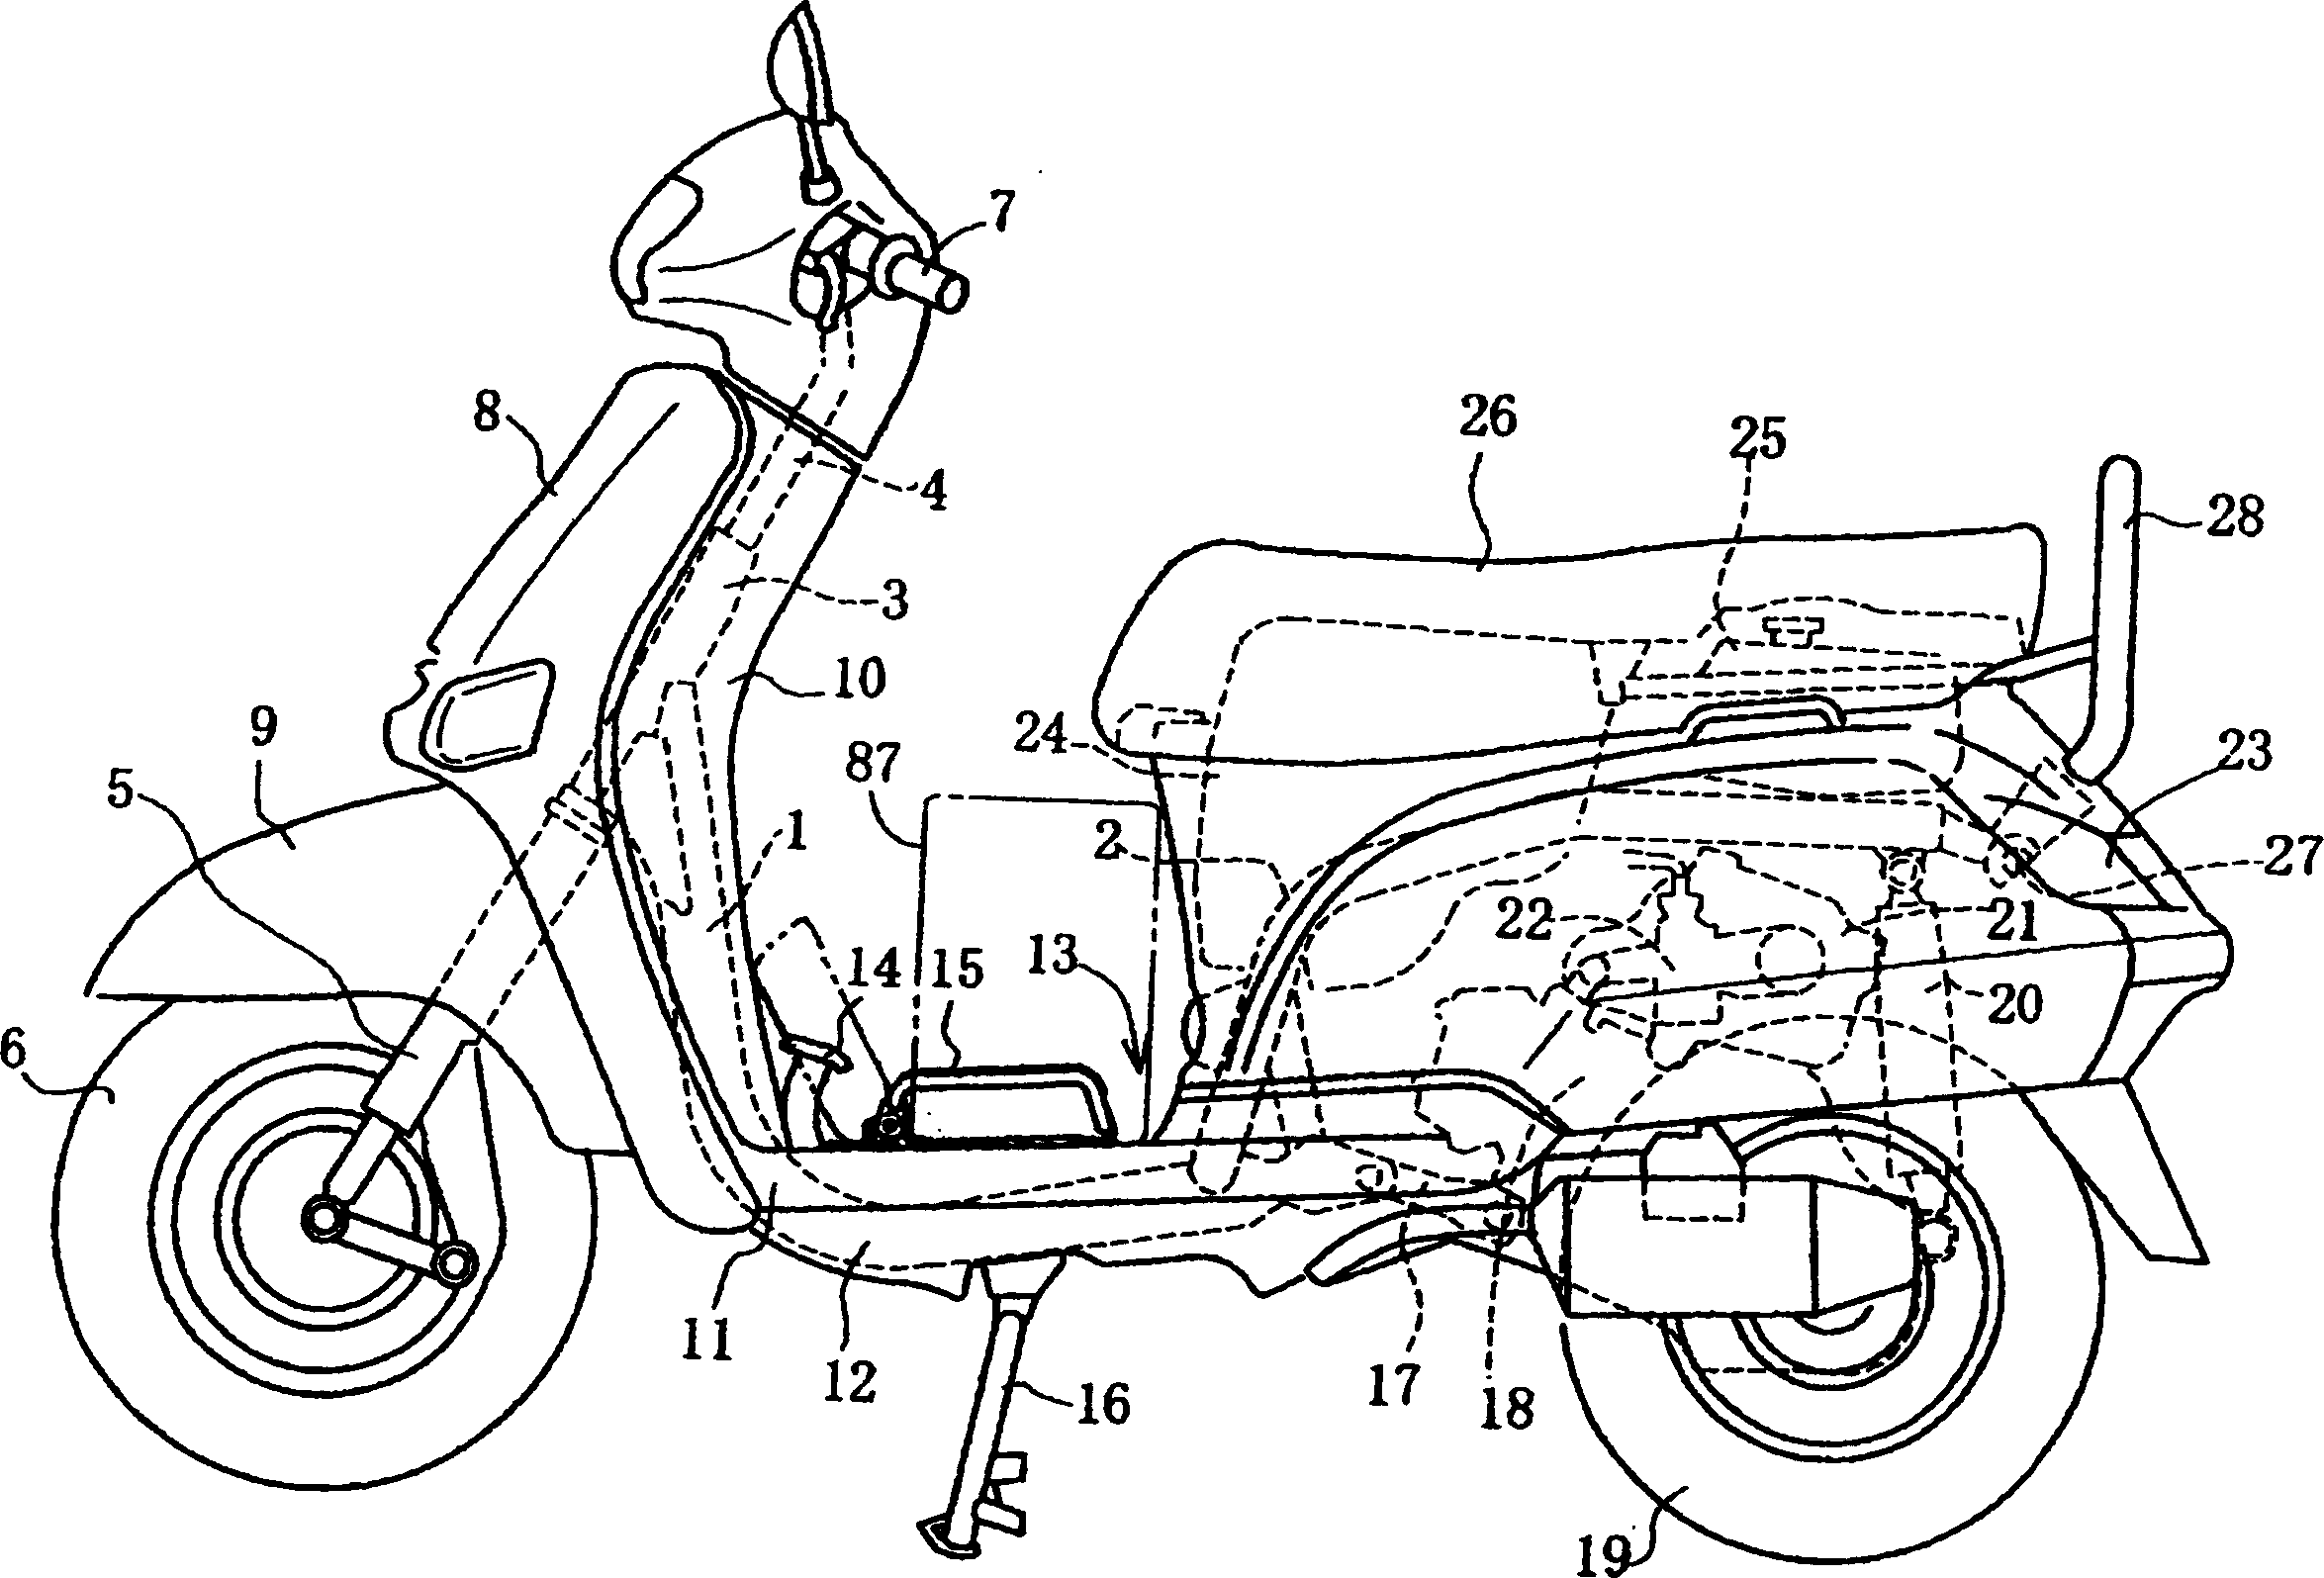 Baseboard structure for small size motorcycle